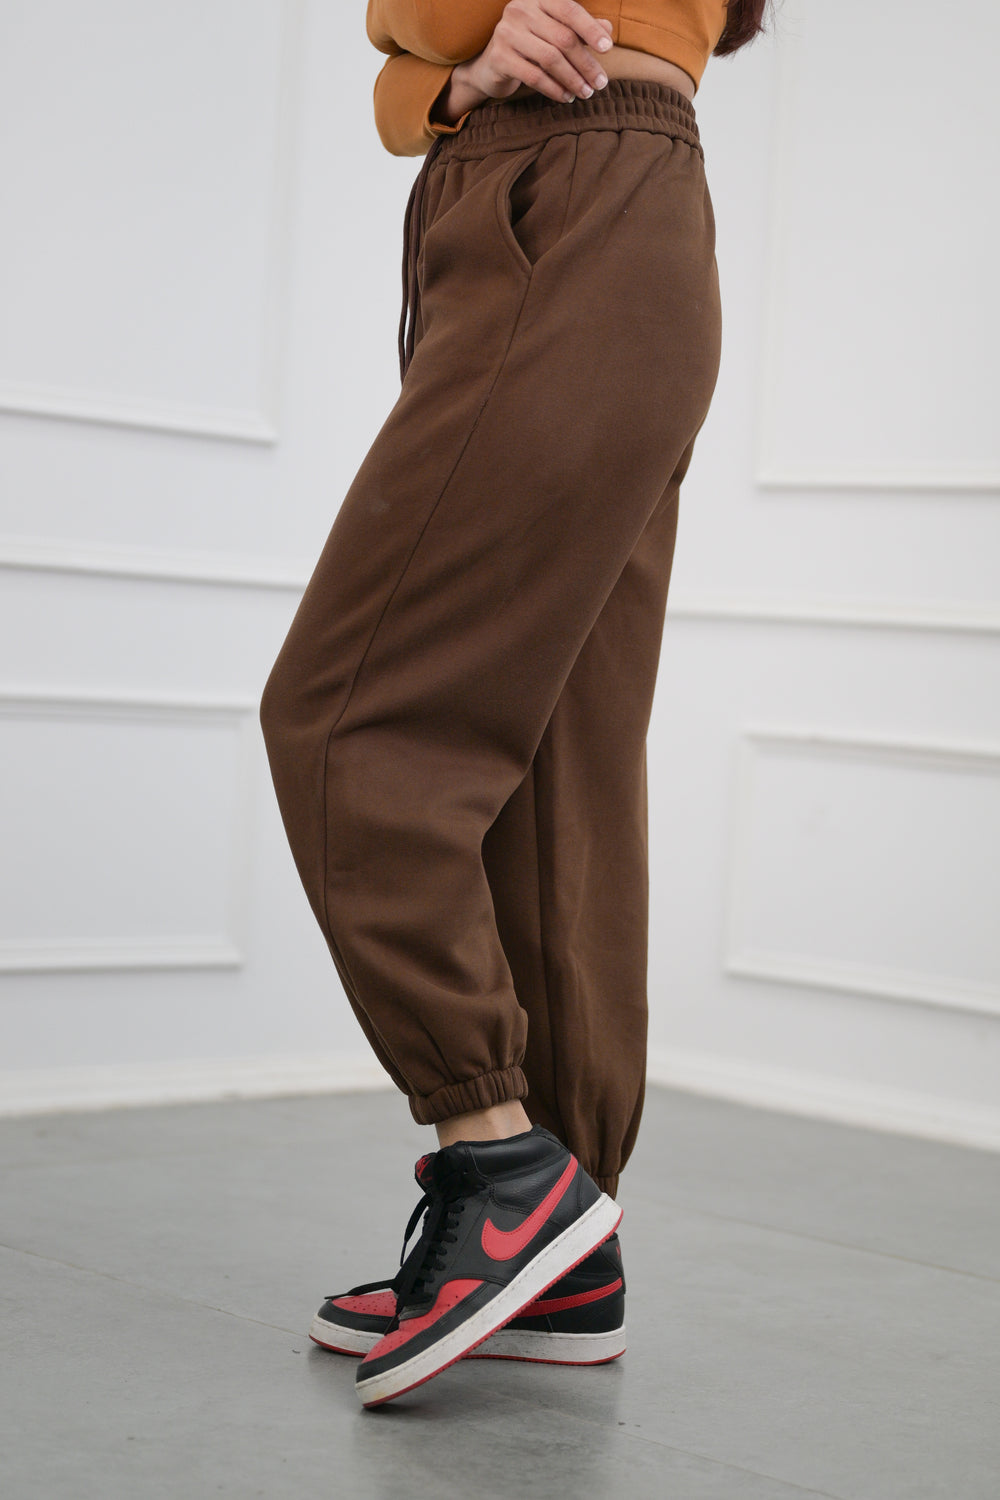 Cozy brown jogger pants for women